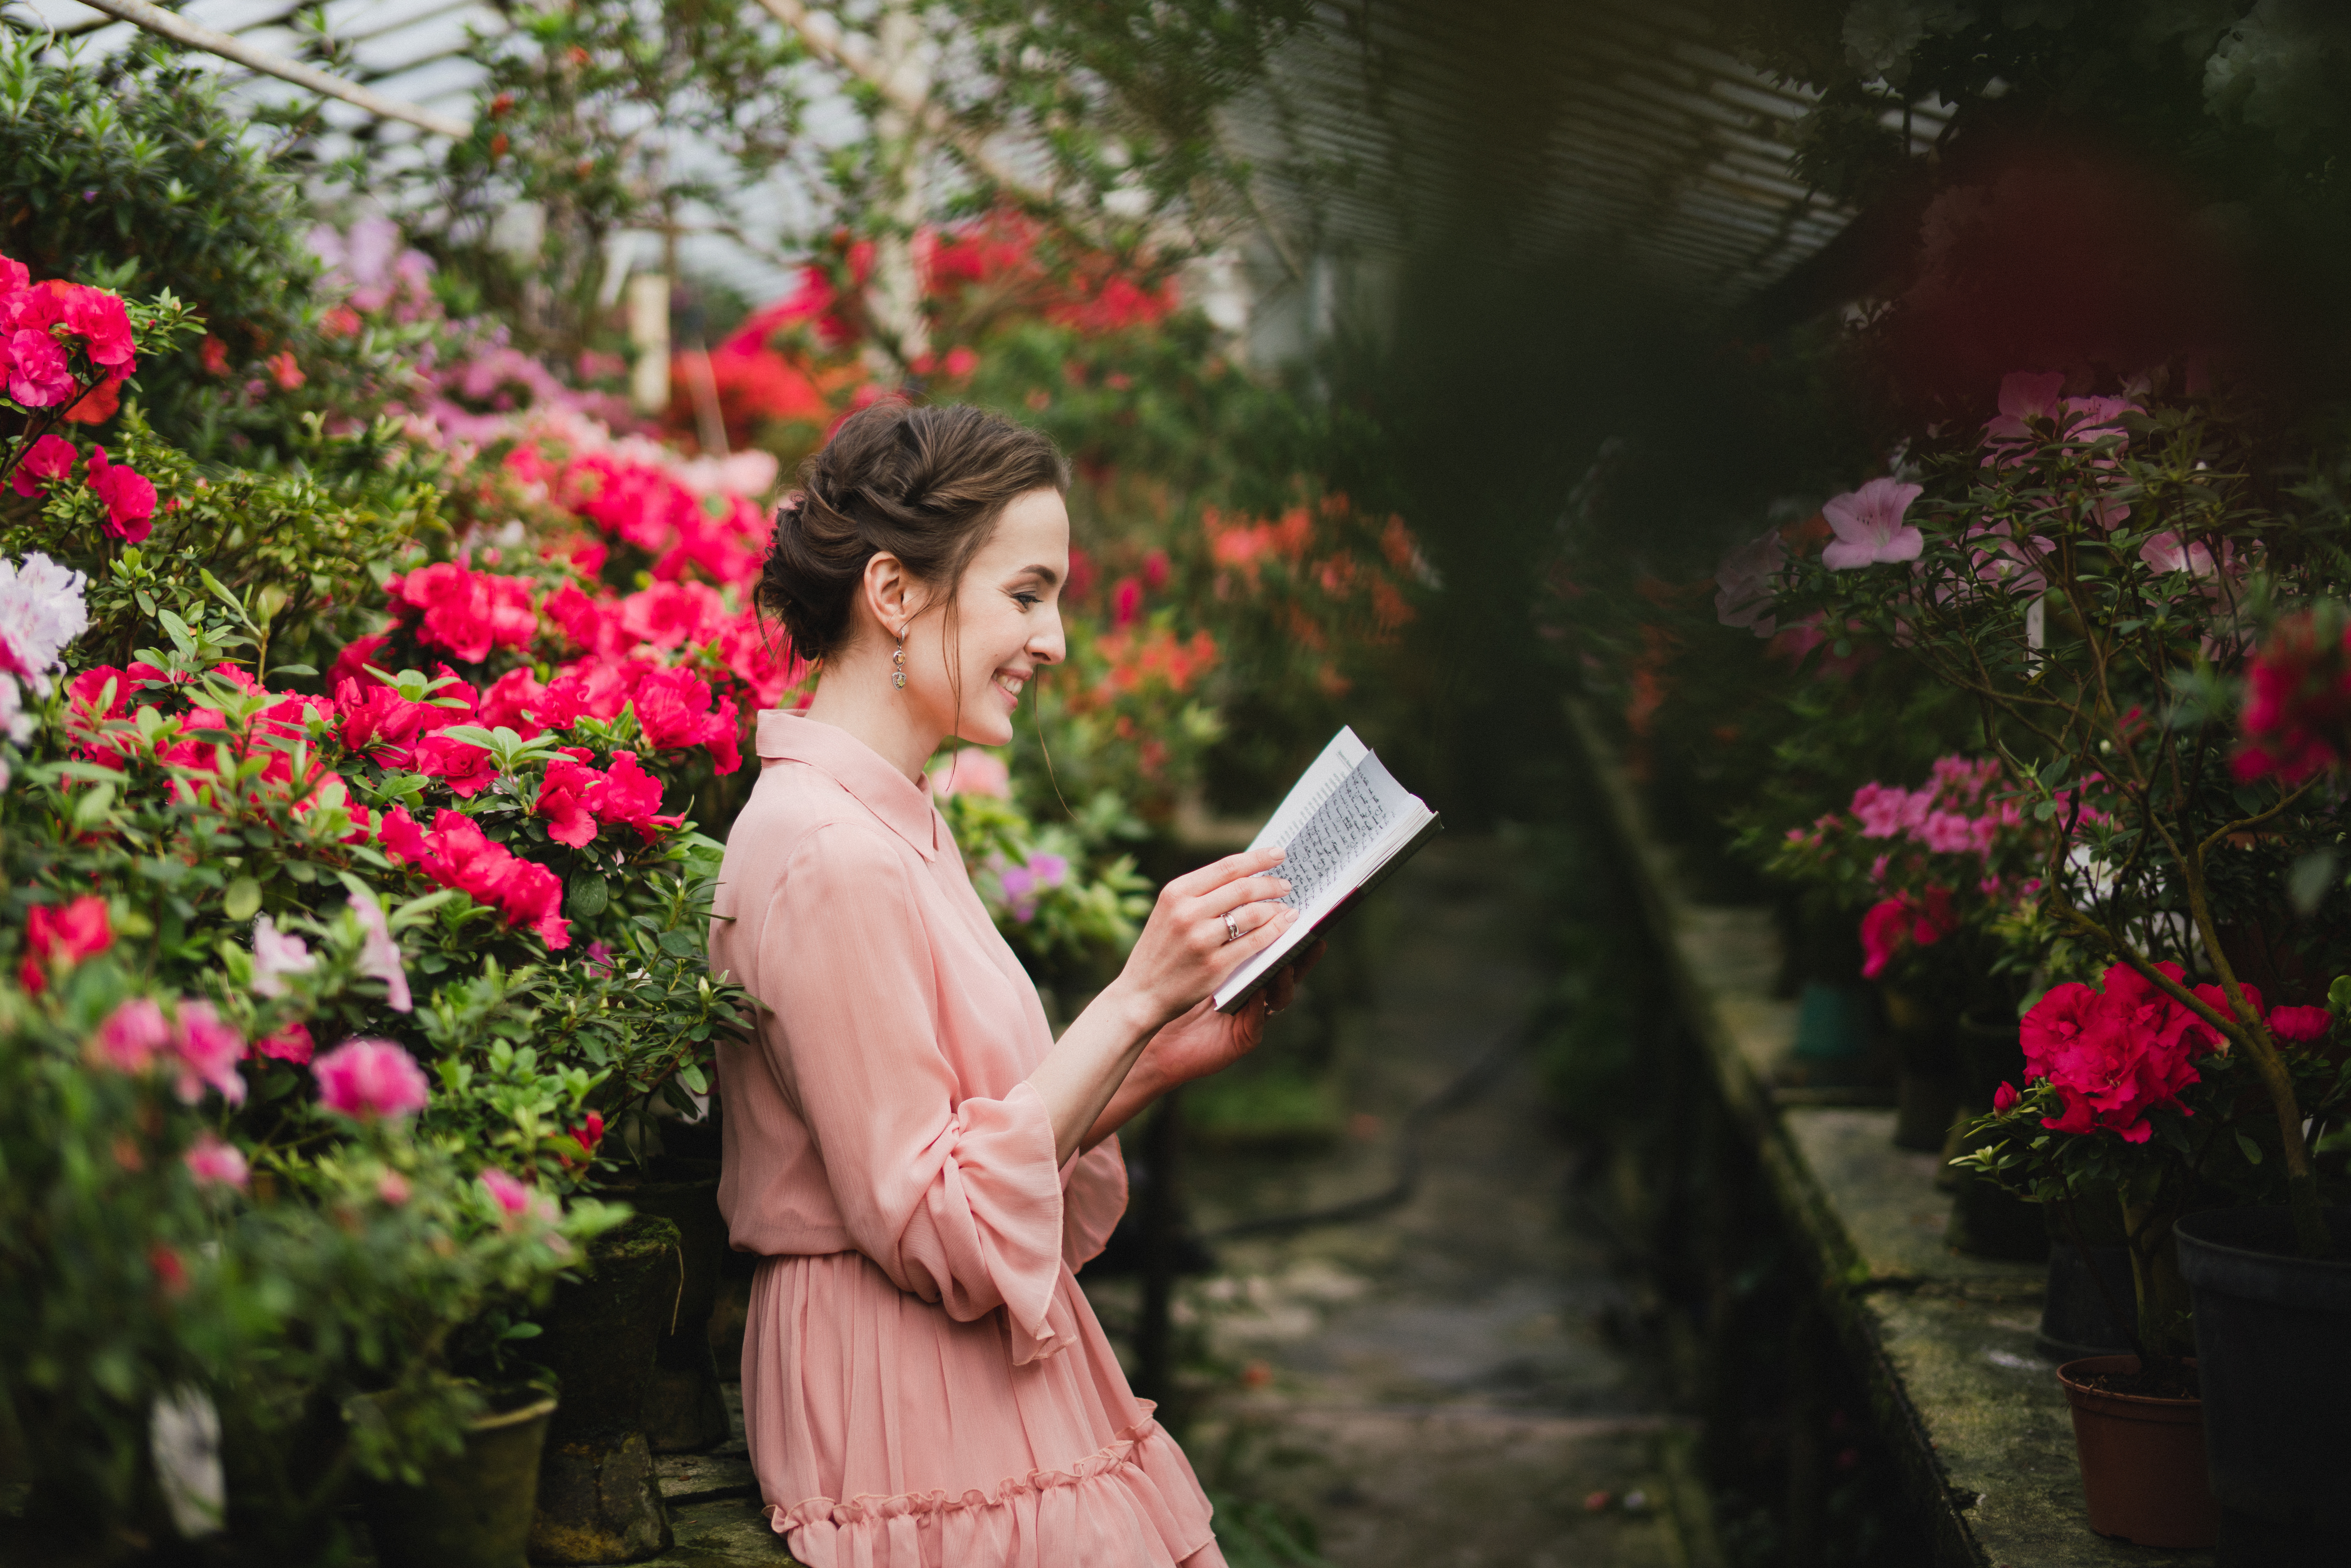 Young beautiful caucasian woman in glass greenhouse among colorful azalea flowers. Art portrait of a girl wearing a romantic pink dress and reading a book.